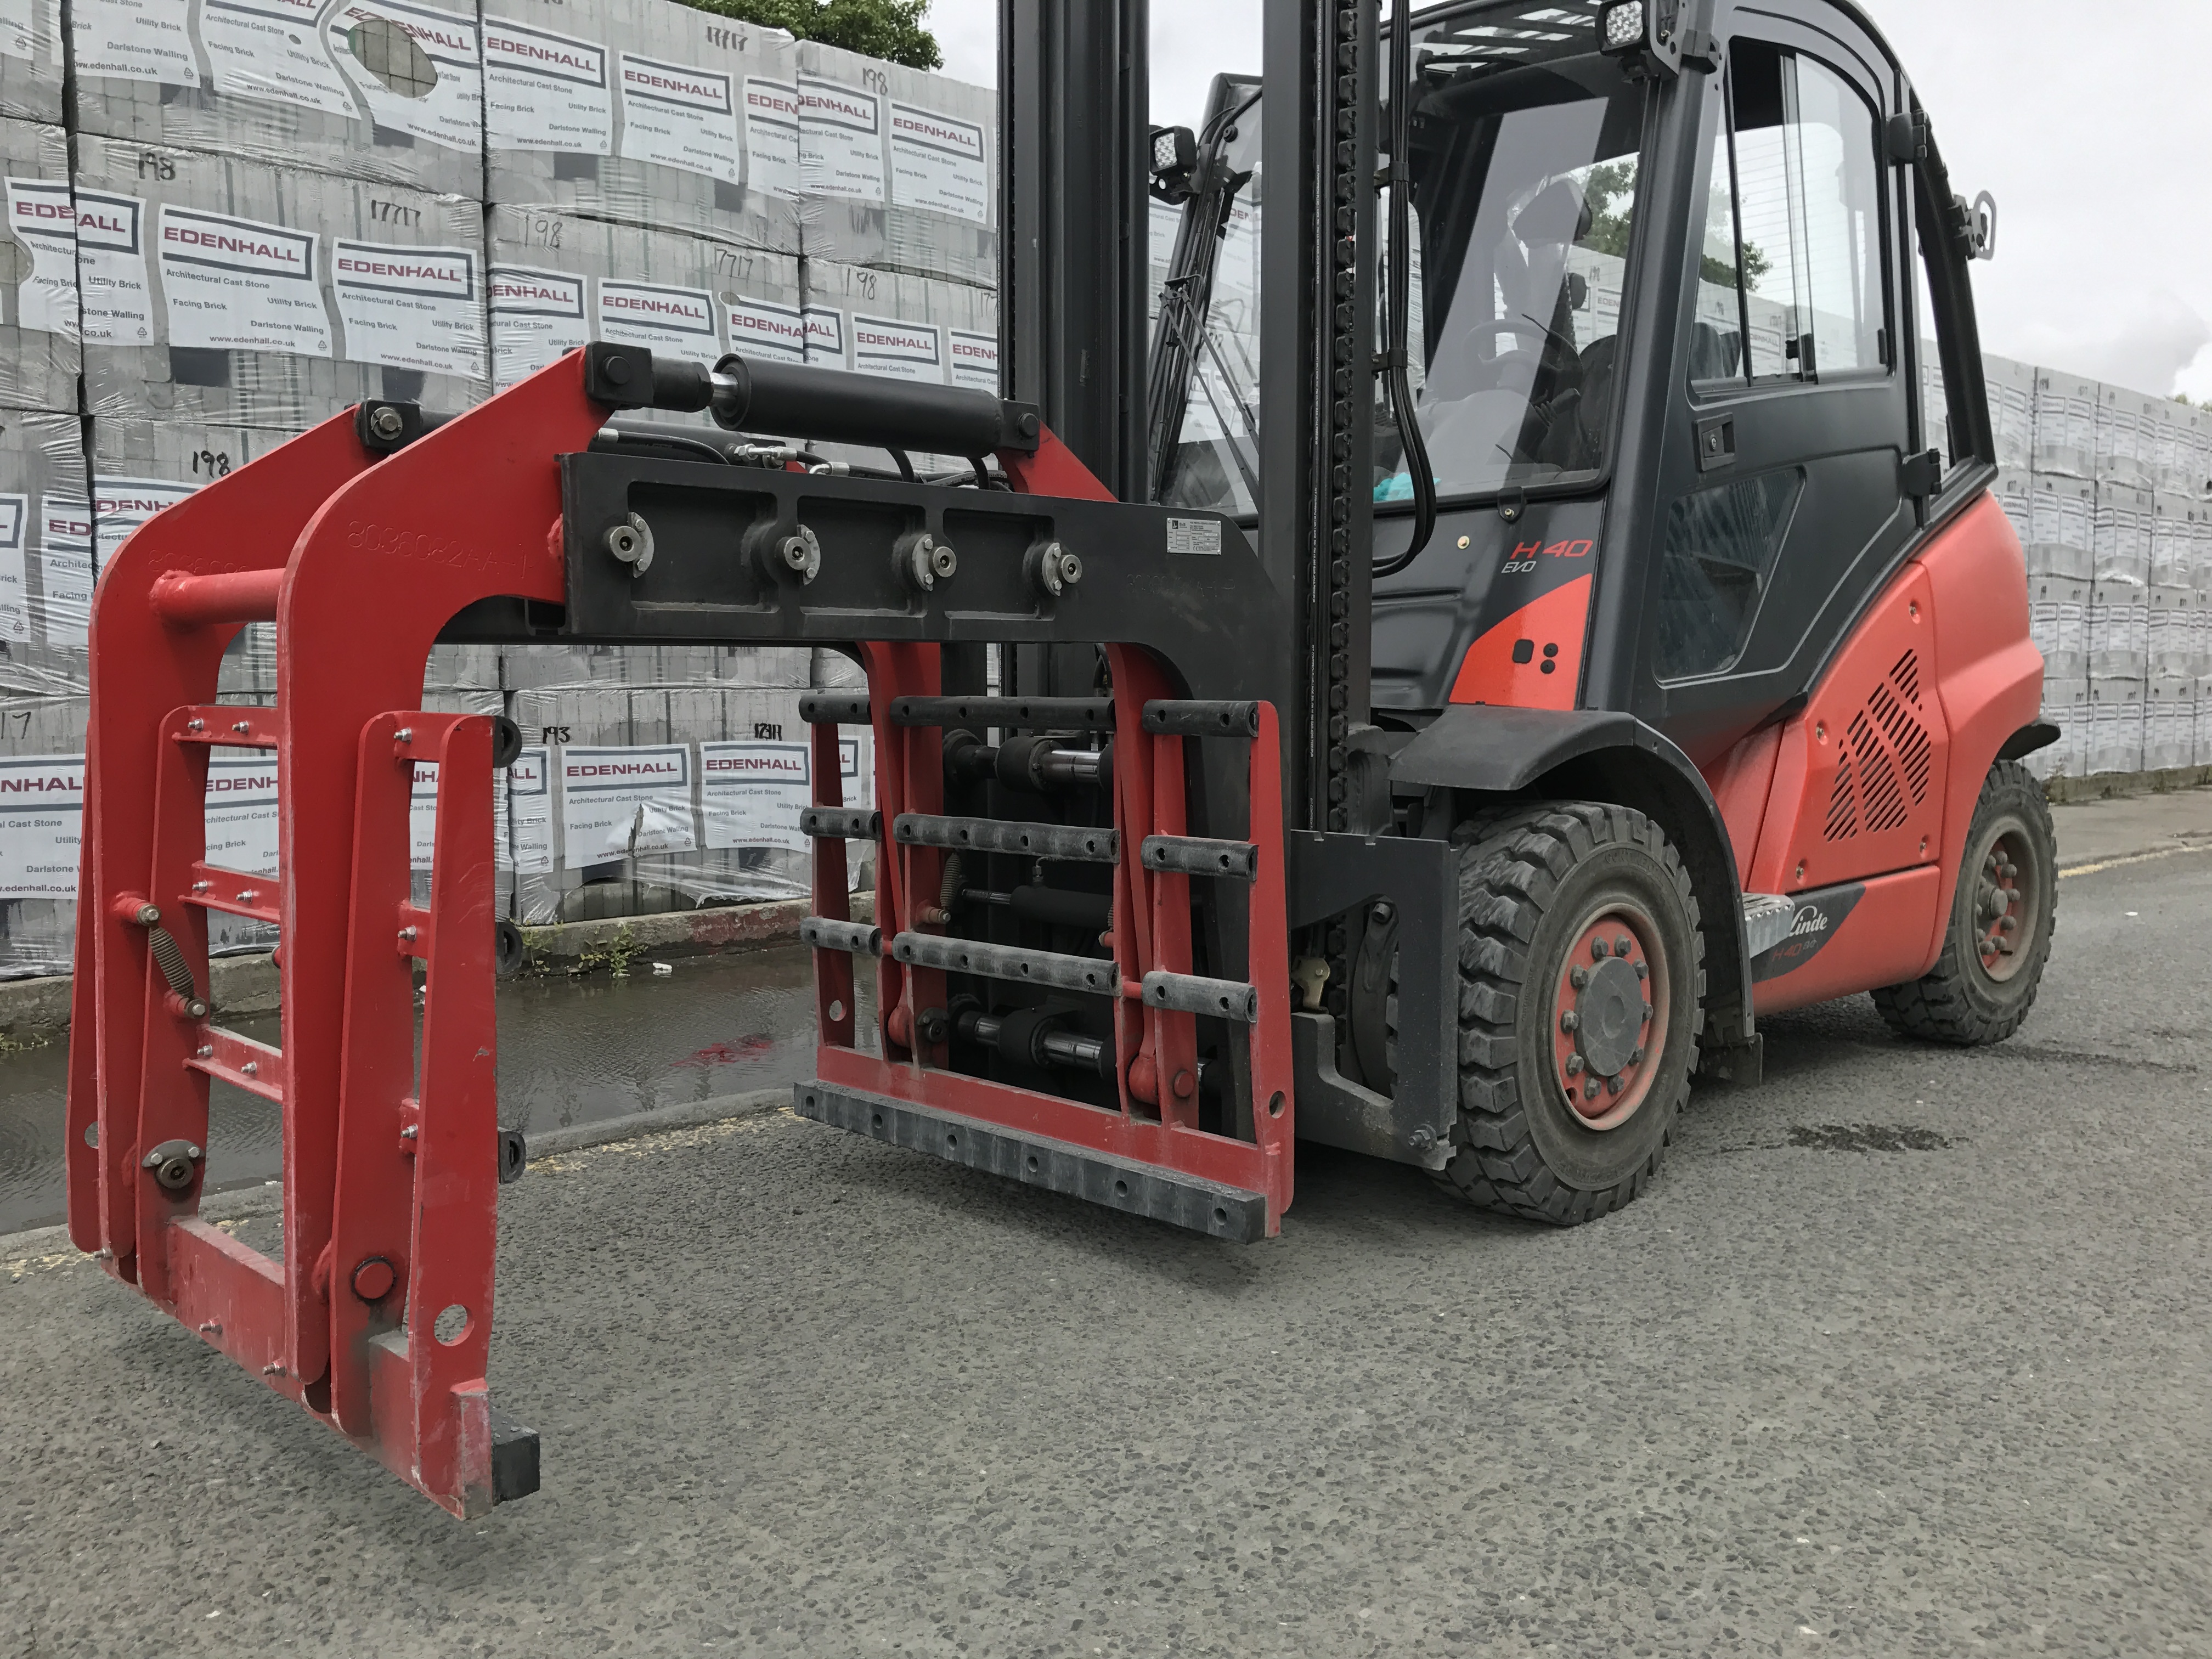 B&B Attachments exhibits at the UK’s only dedicated concrete event